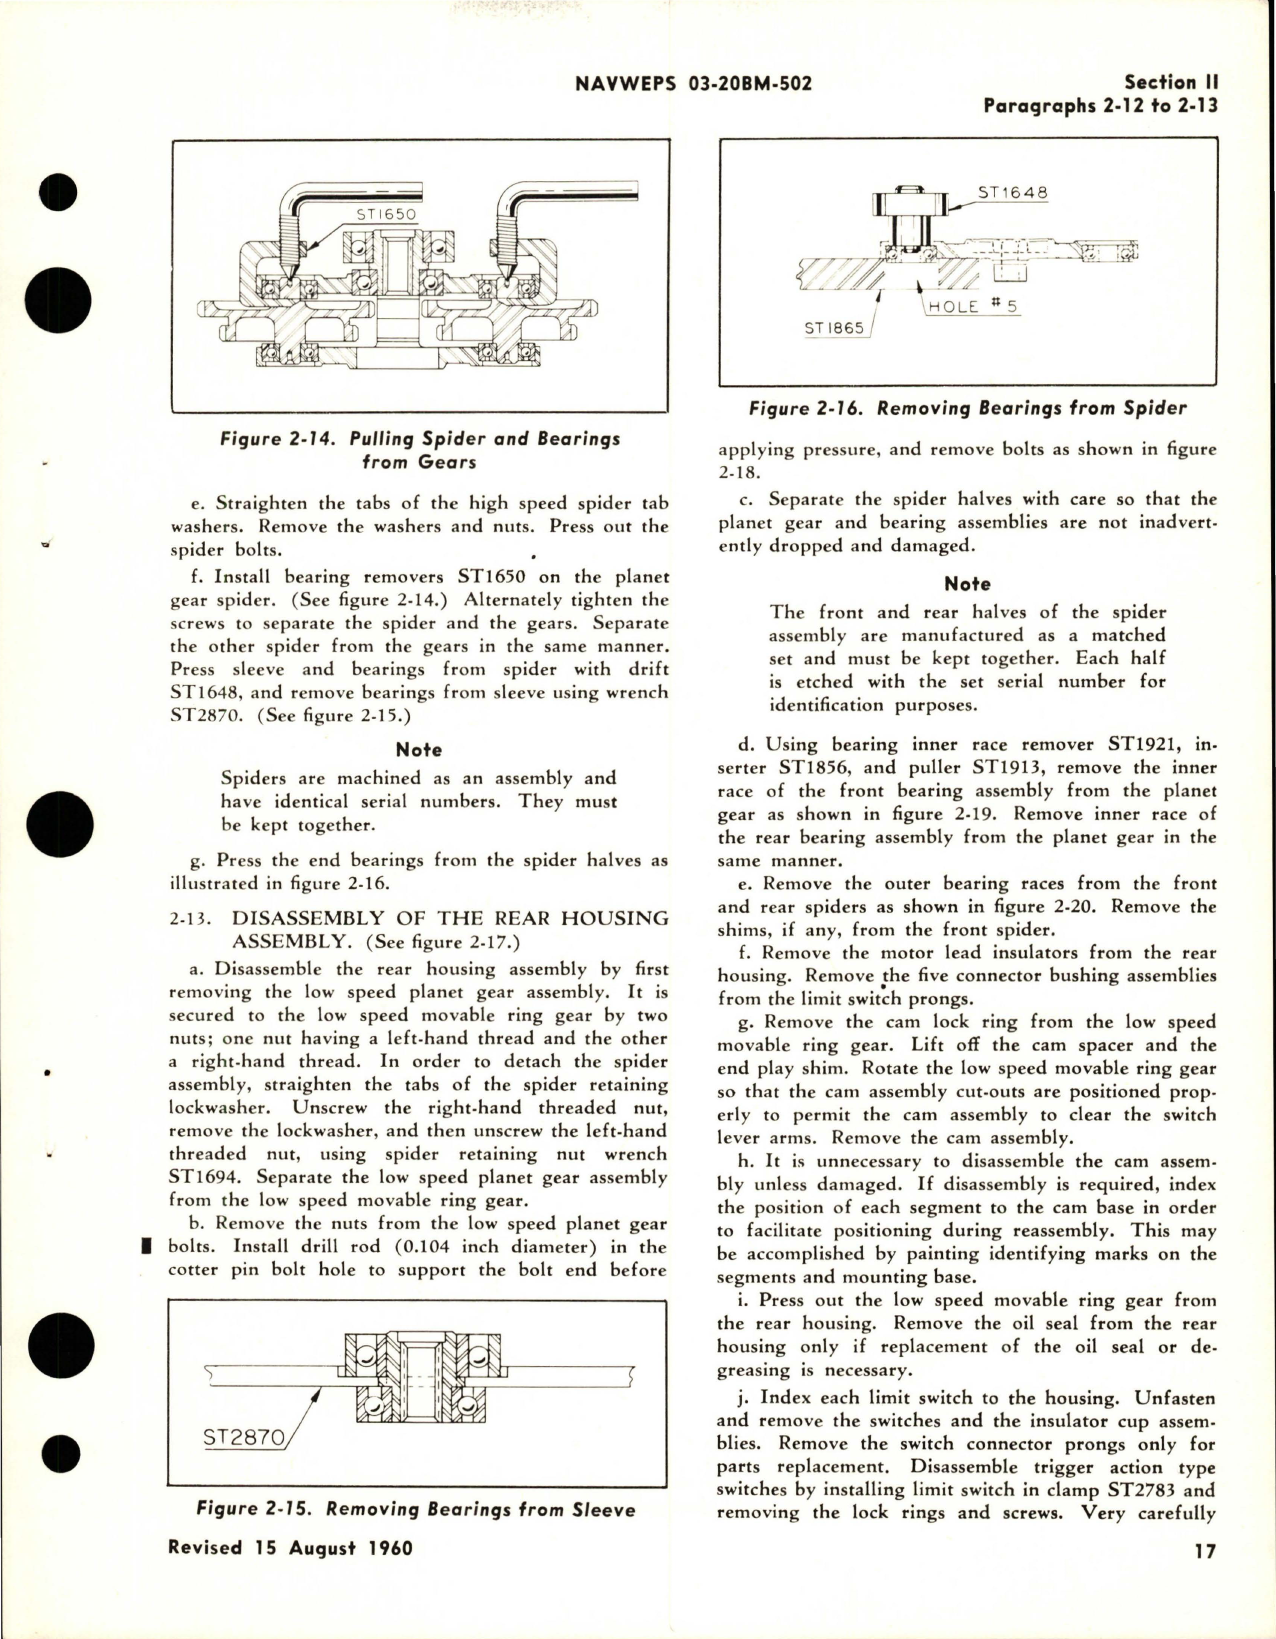 Sample page 9 from AirCorps Library document: Overhaul Instructions for Electric Propeller and Controls - C634S-C104 